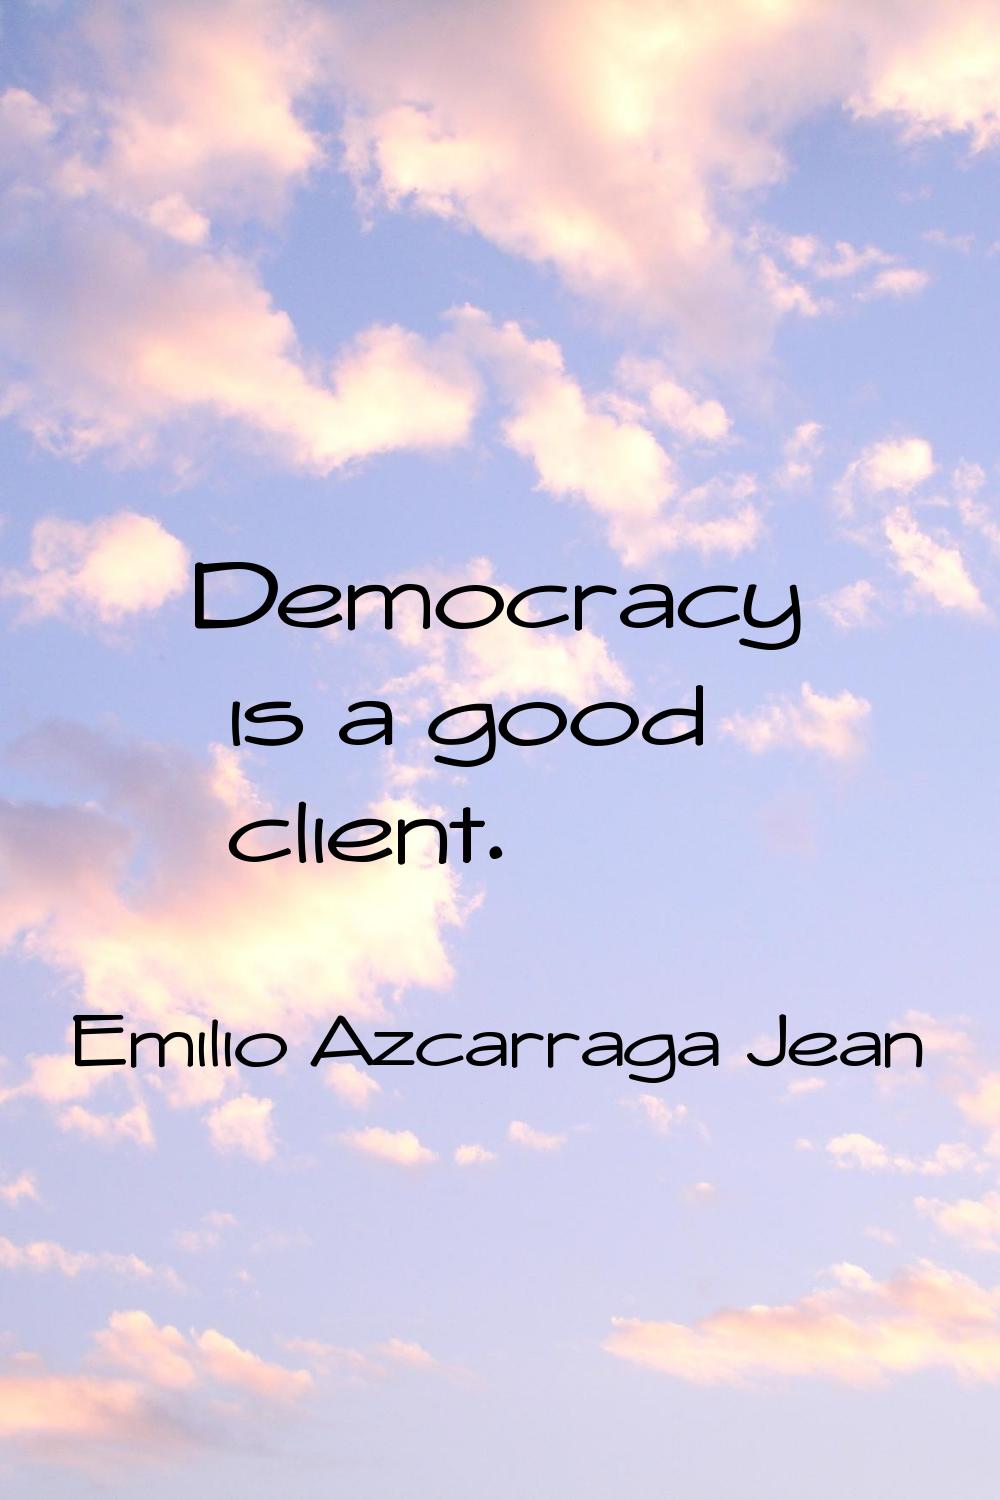 Democracy is a good client.